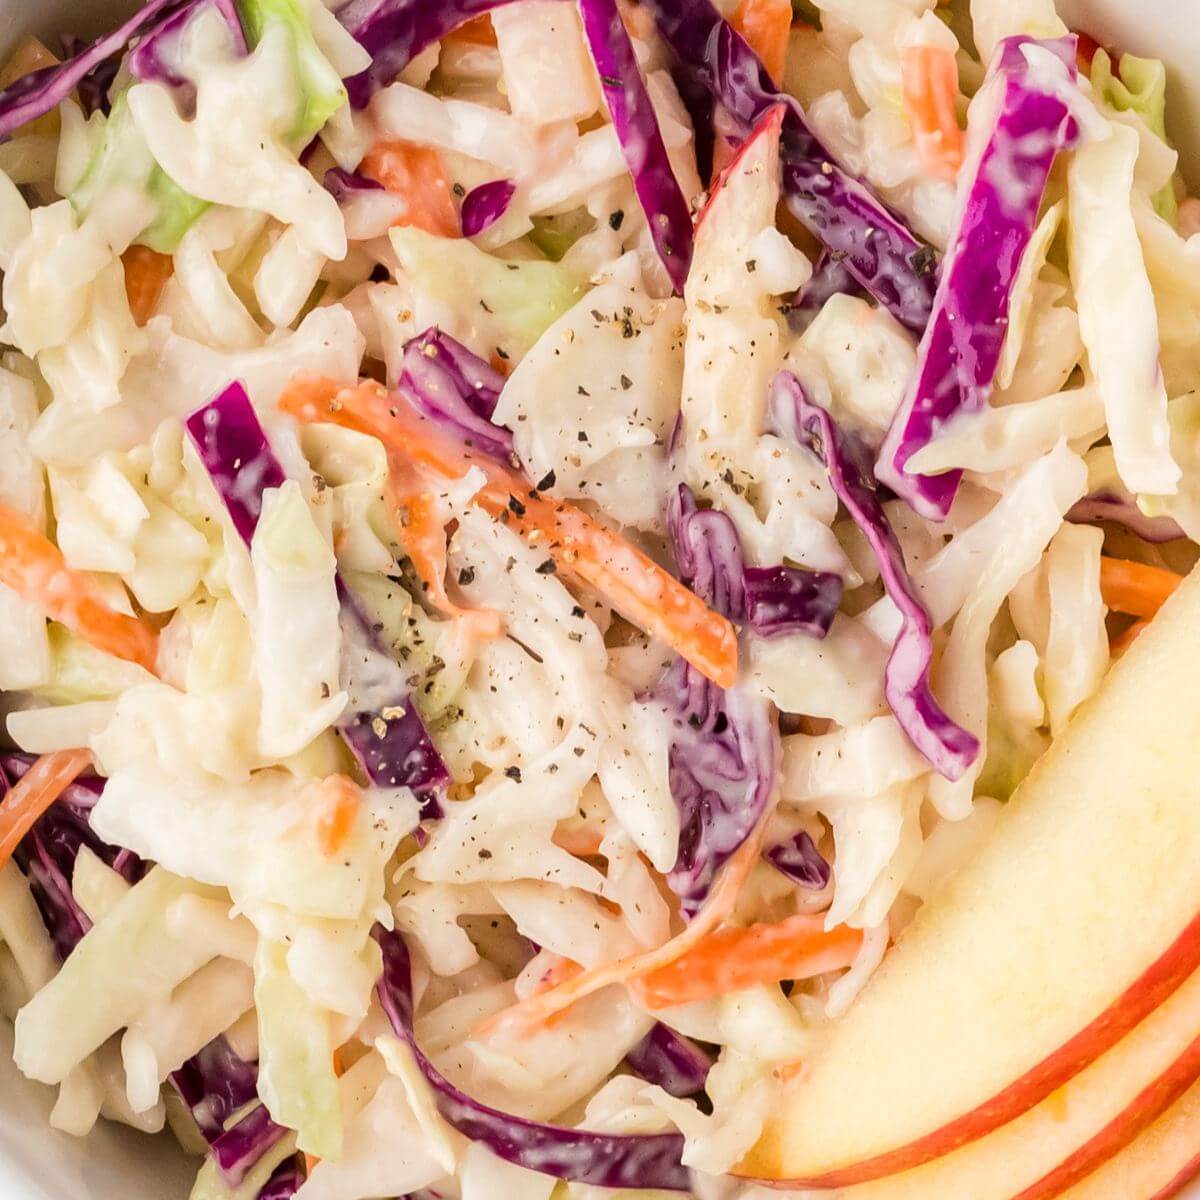 Apple slices and crisp coleslaw mix are shown up close.